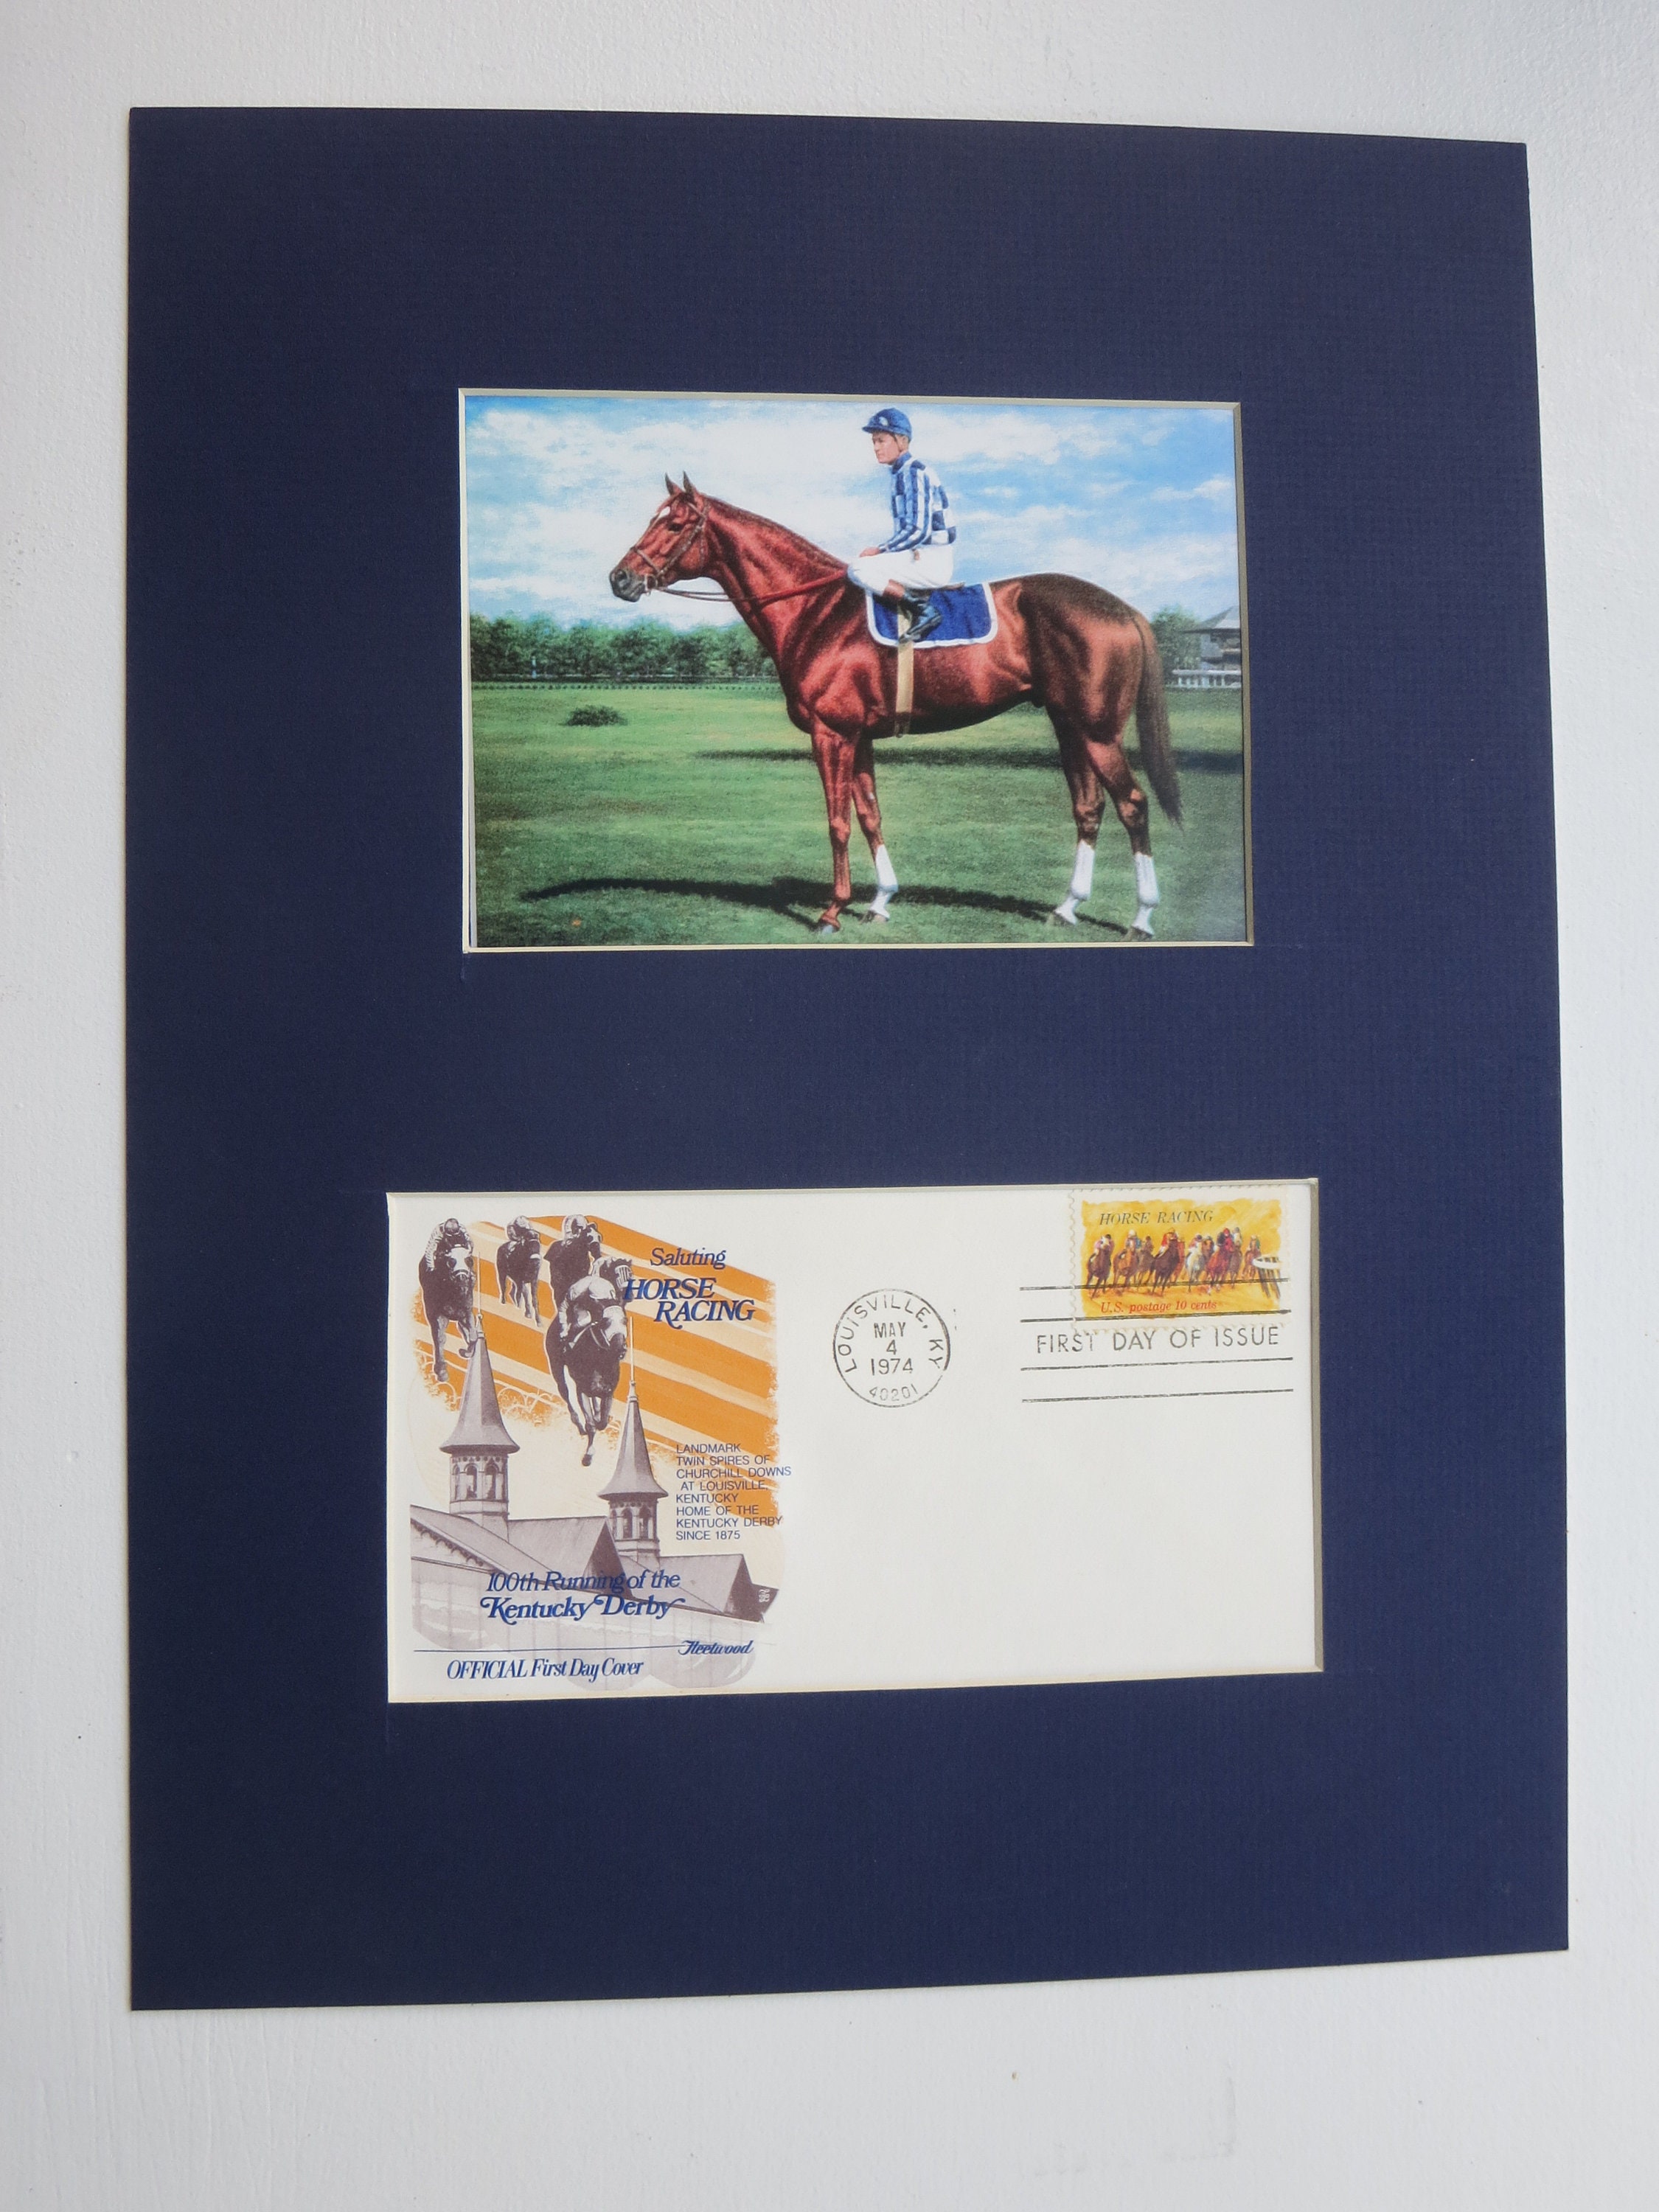 Secretariat Wins the Triple Crown & First Day Cover of the - Etsy